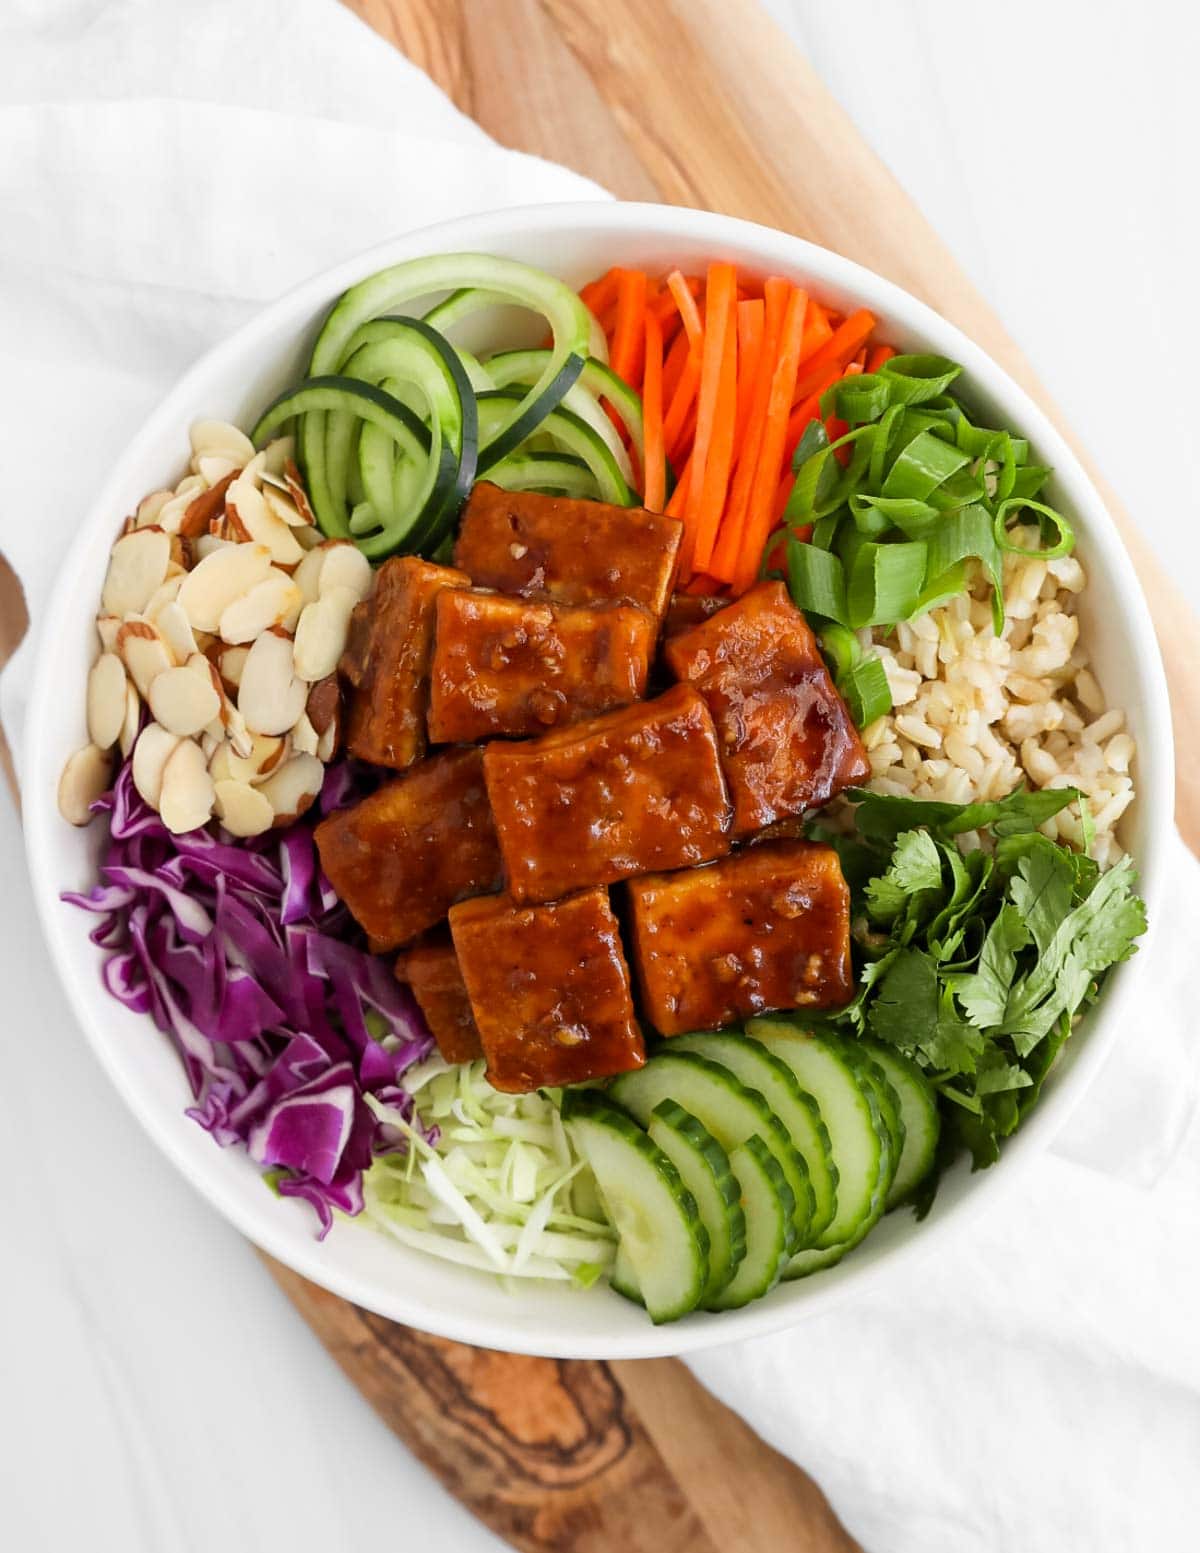 Tofu on a bed of vegetables such as carrots, cucumbers, green onions, cilantro, and cabbage, as well as rice and almonds.